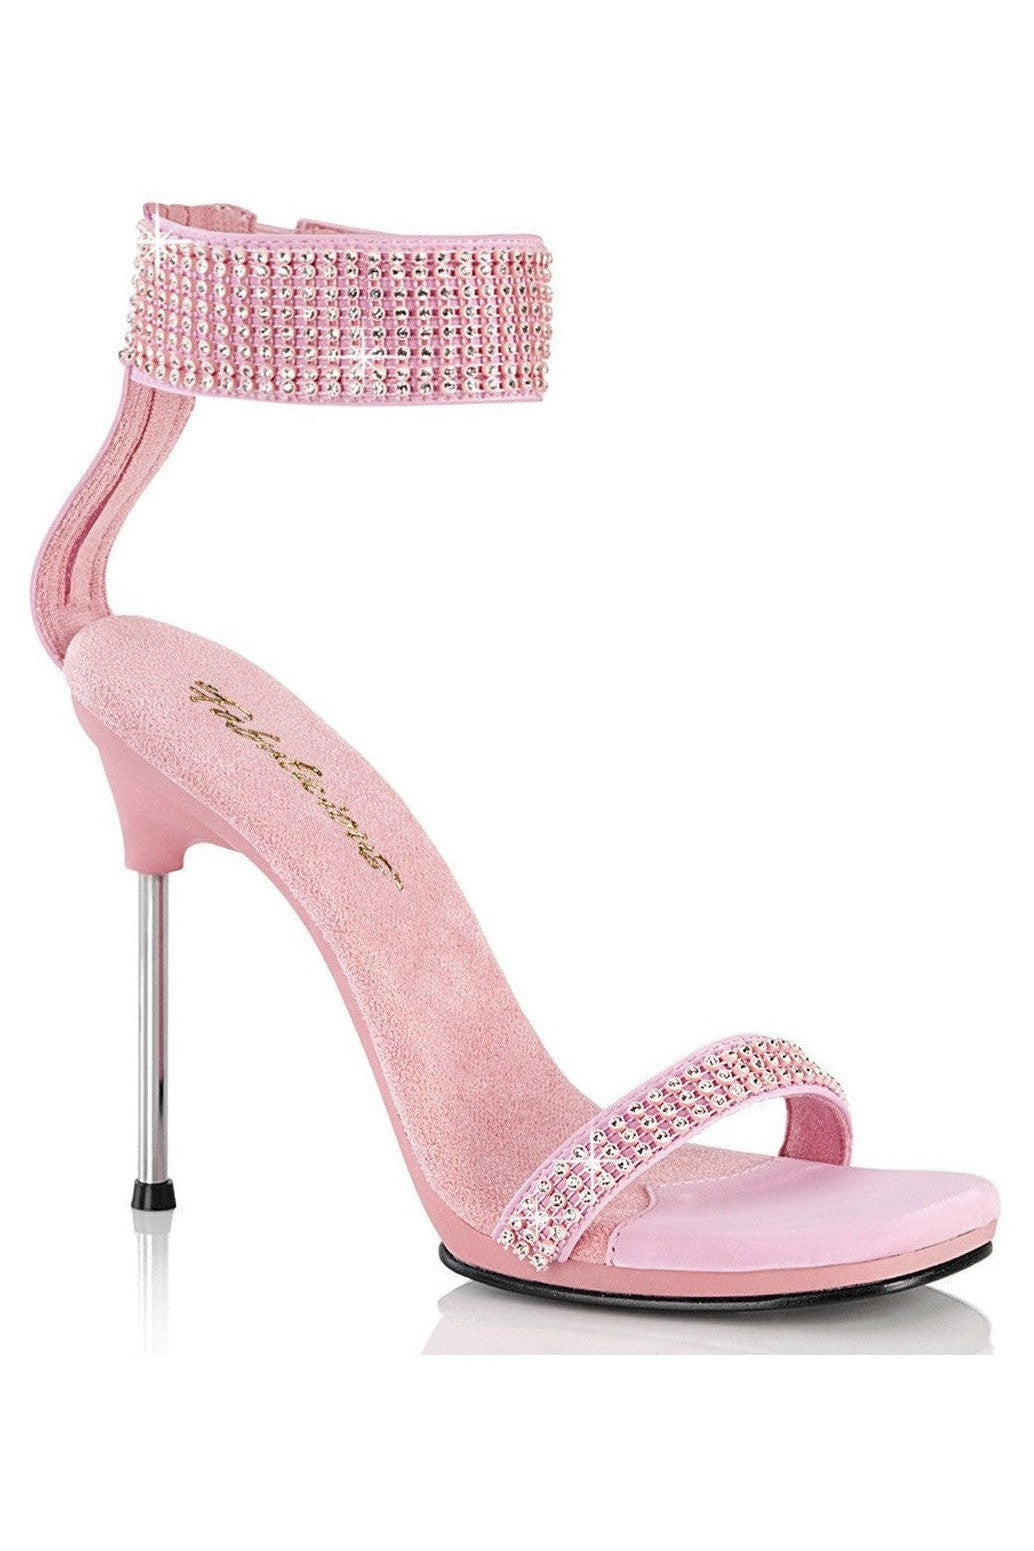 Fabulicious Pink Sandals Platform Stripper Shoes | Buy at Sexyshoes.com